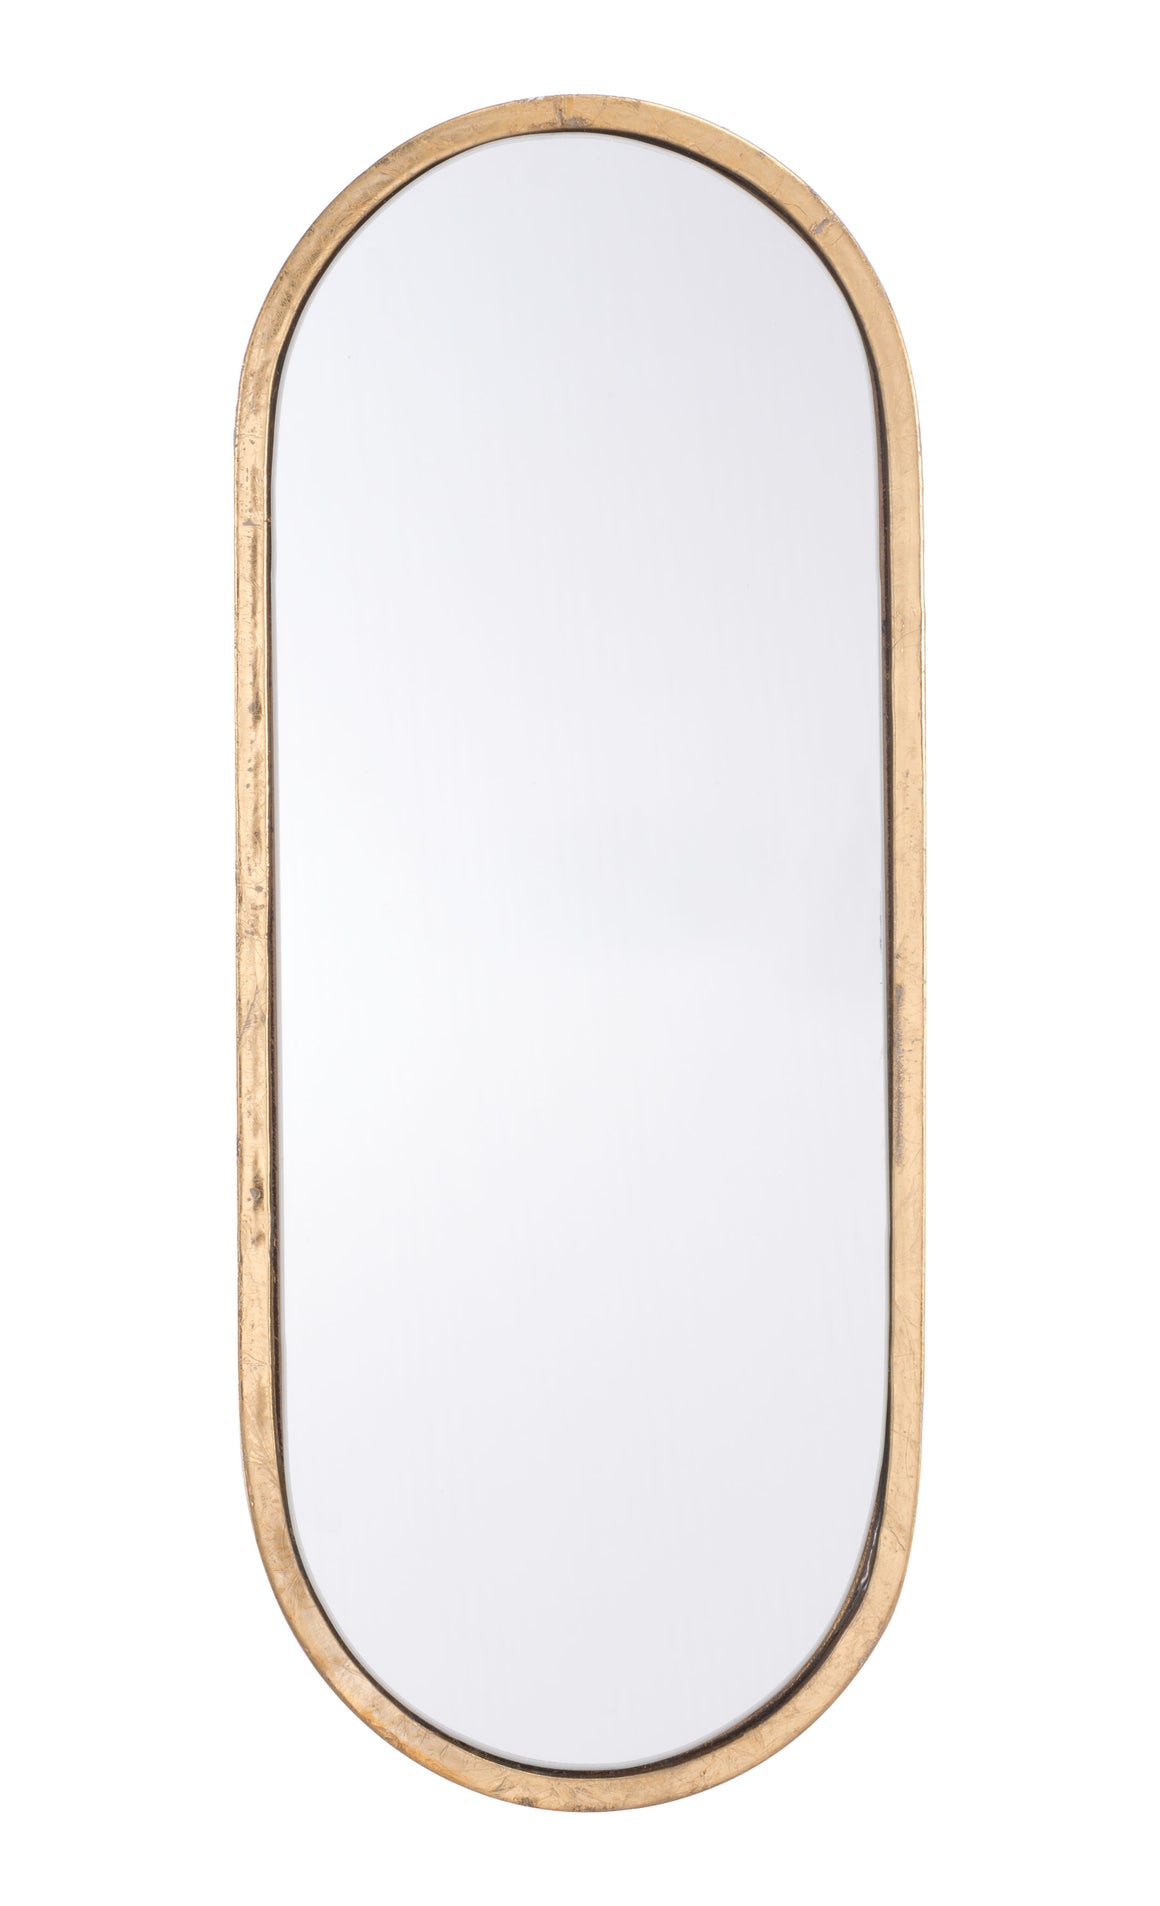 Oval Gold Mirror Gold